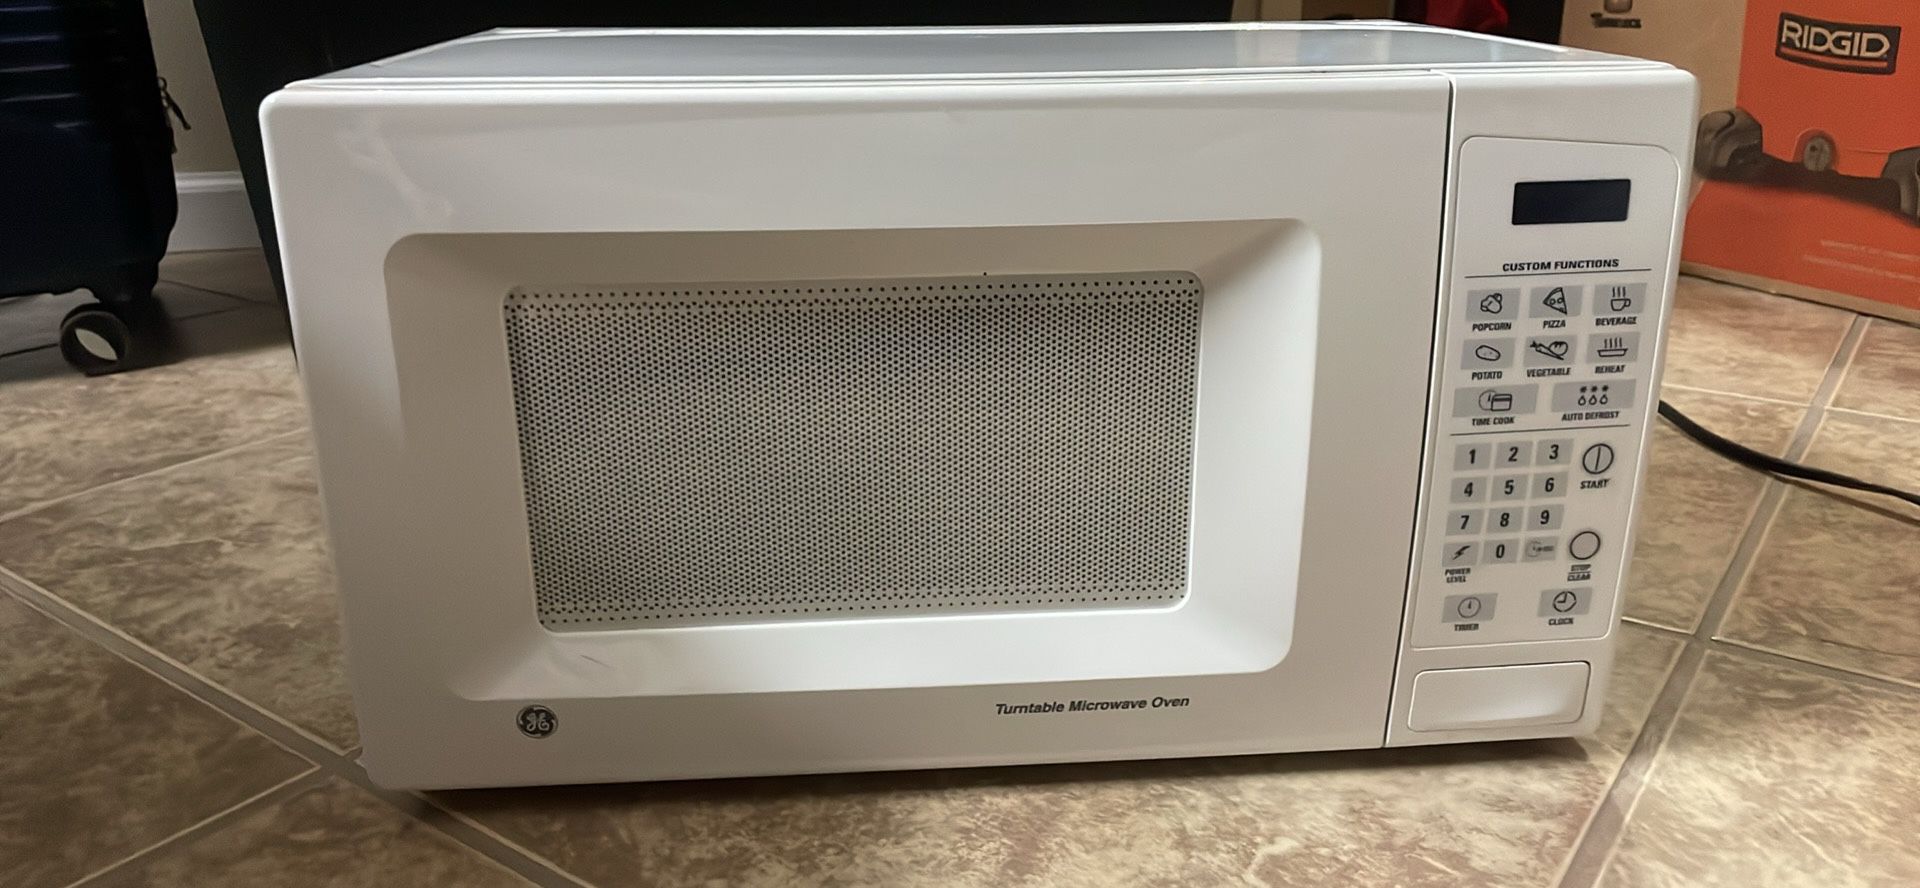 Turntable Microwave Oven